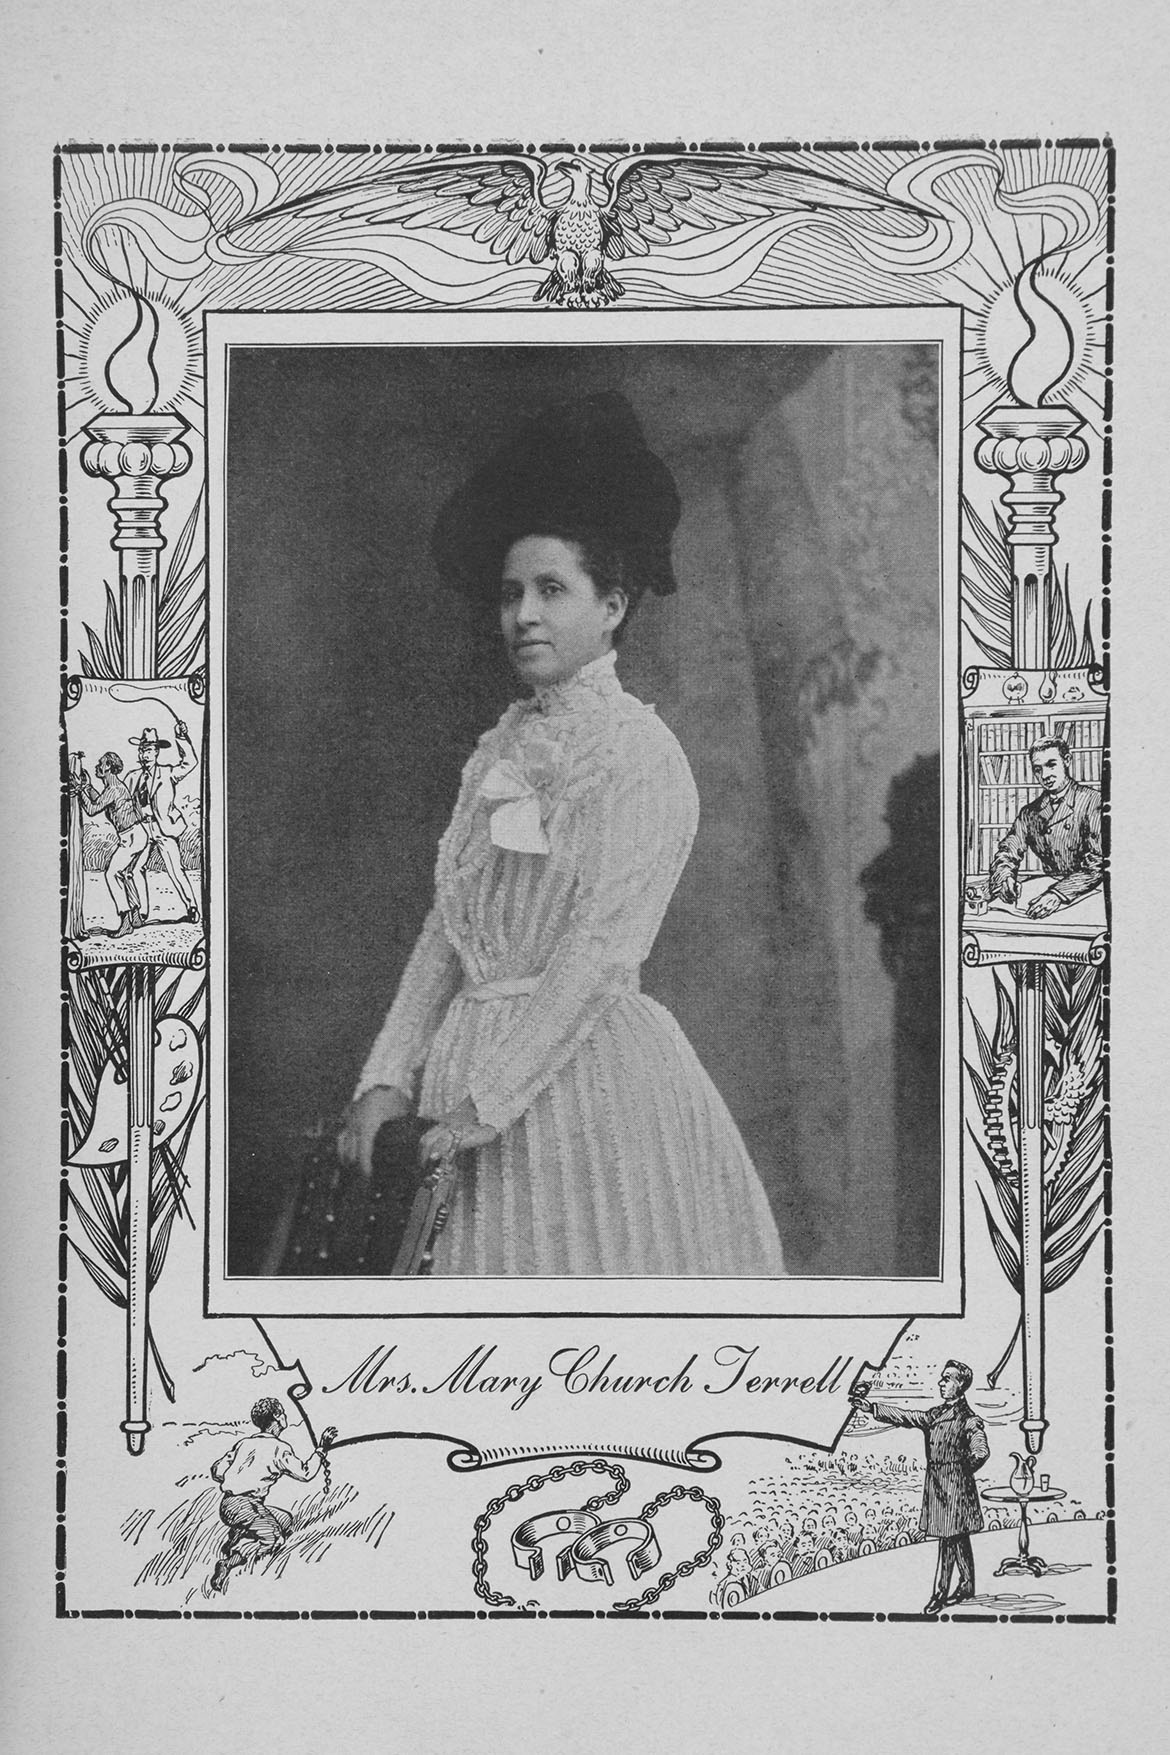 An image of Mary Church Terrell wearing a white dress and black hat. She is standing with her hands resting against a chair. 